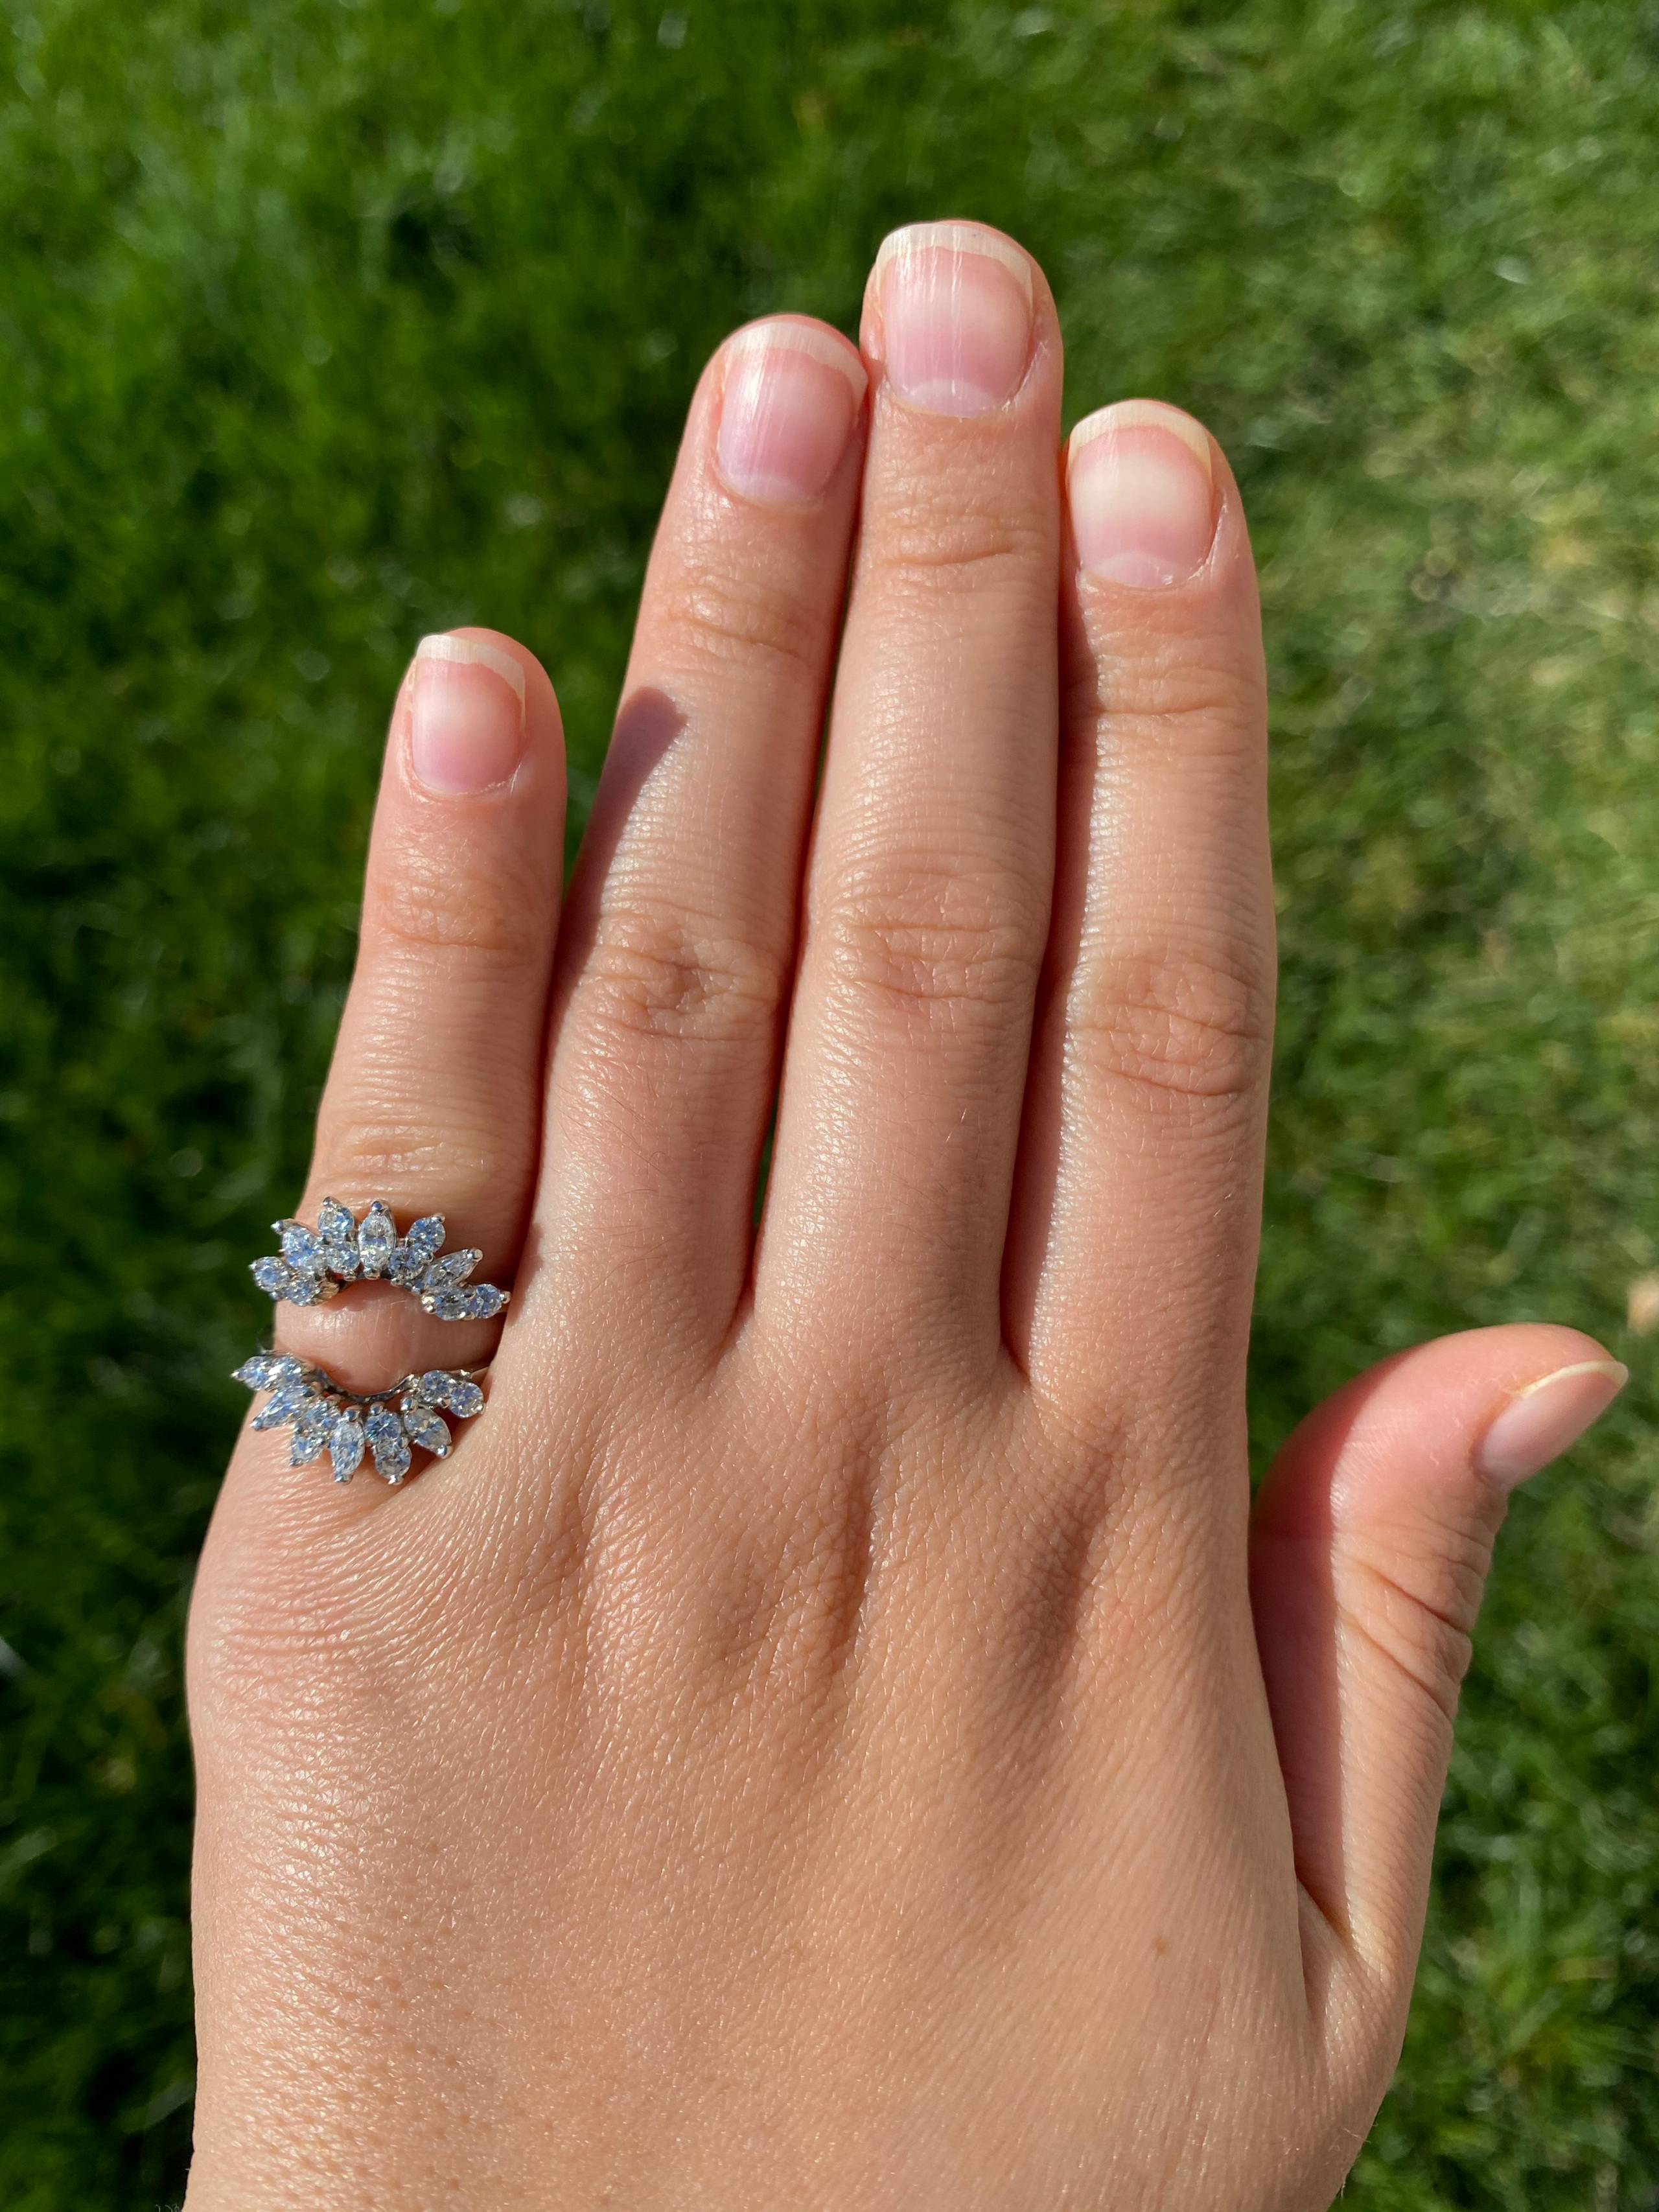 18k White Gold Engagement Ring in a Vintage Setting Country Road